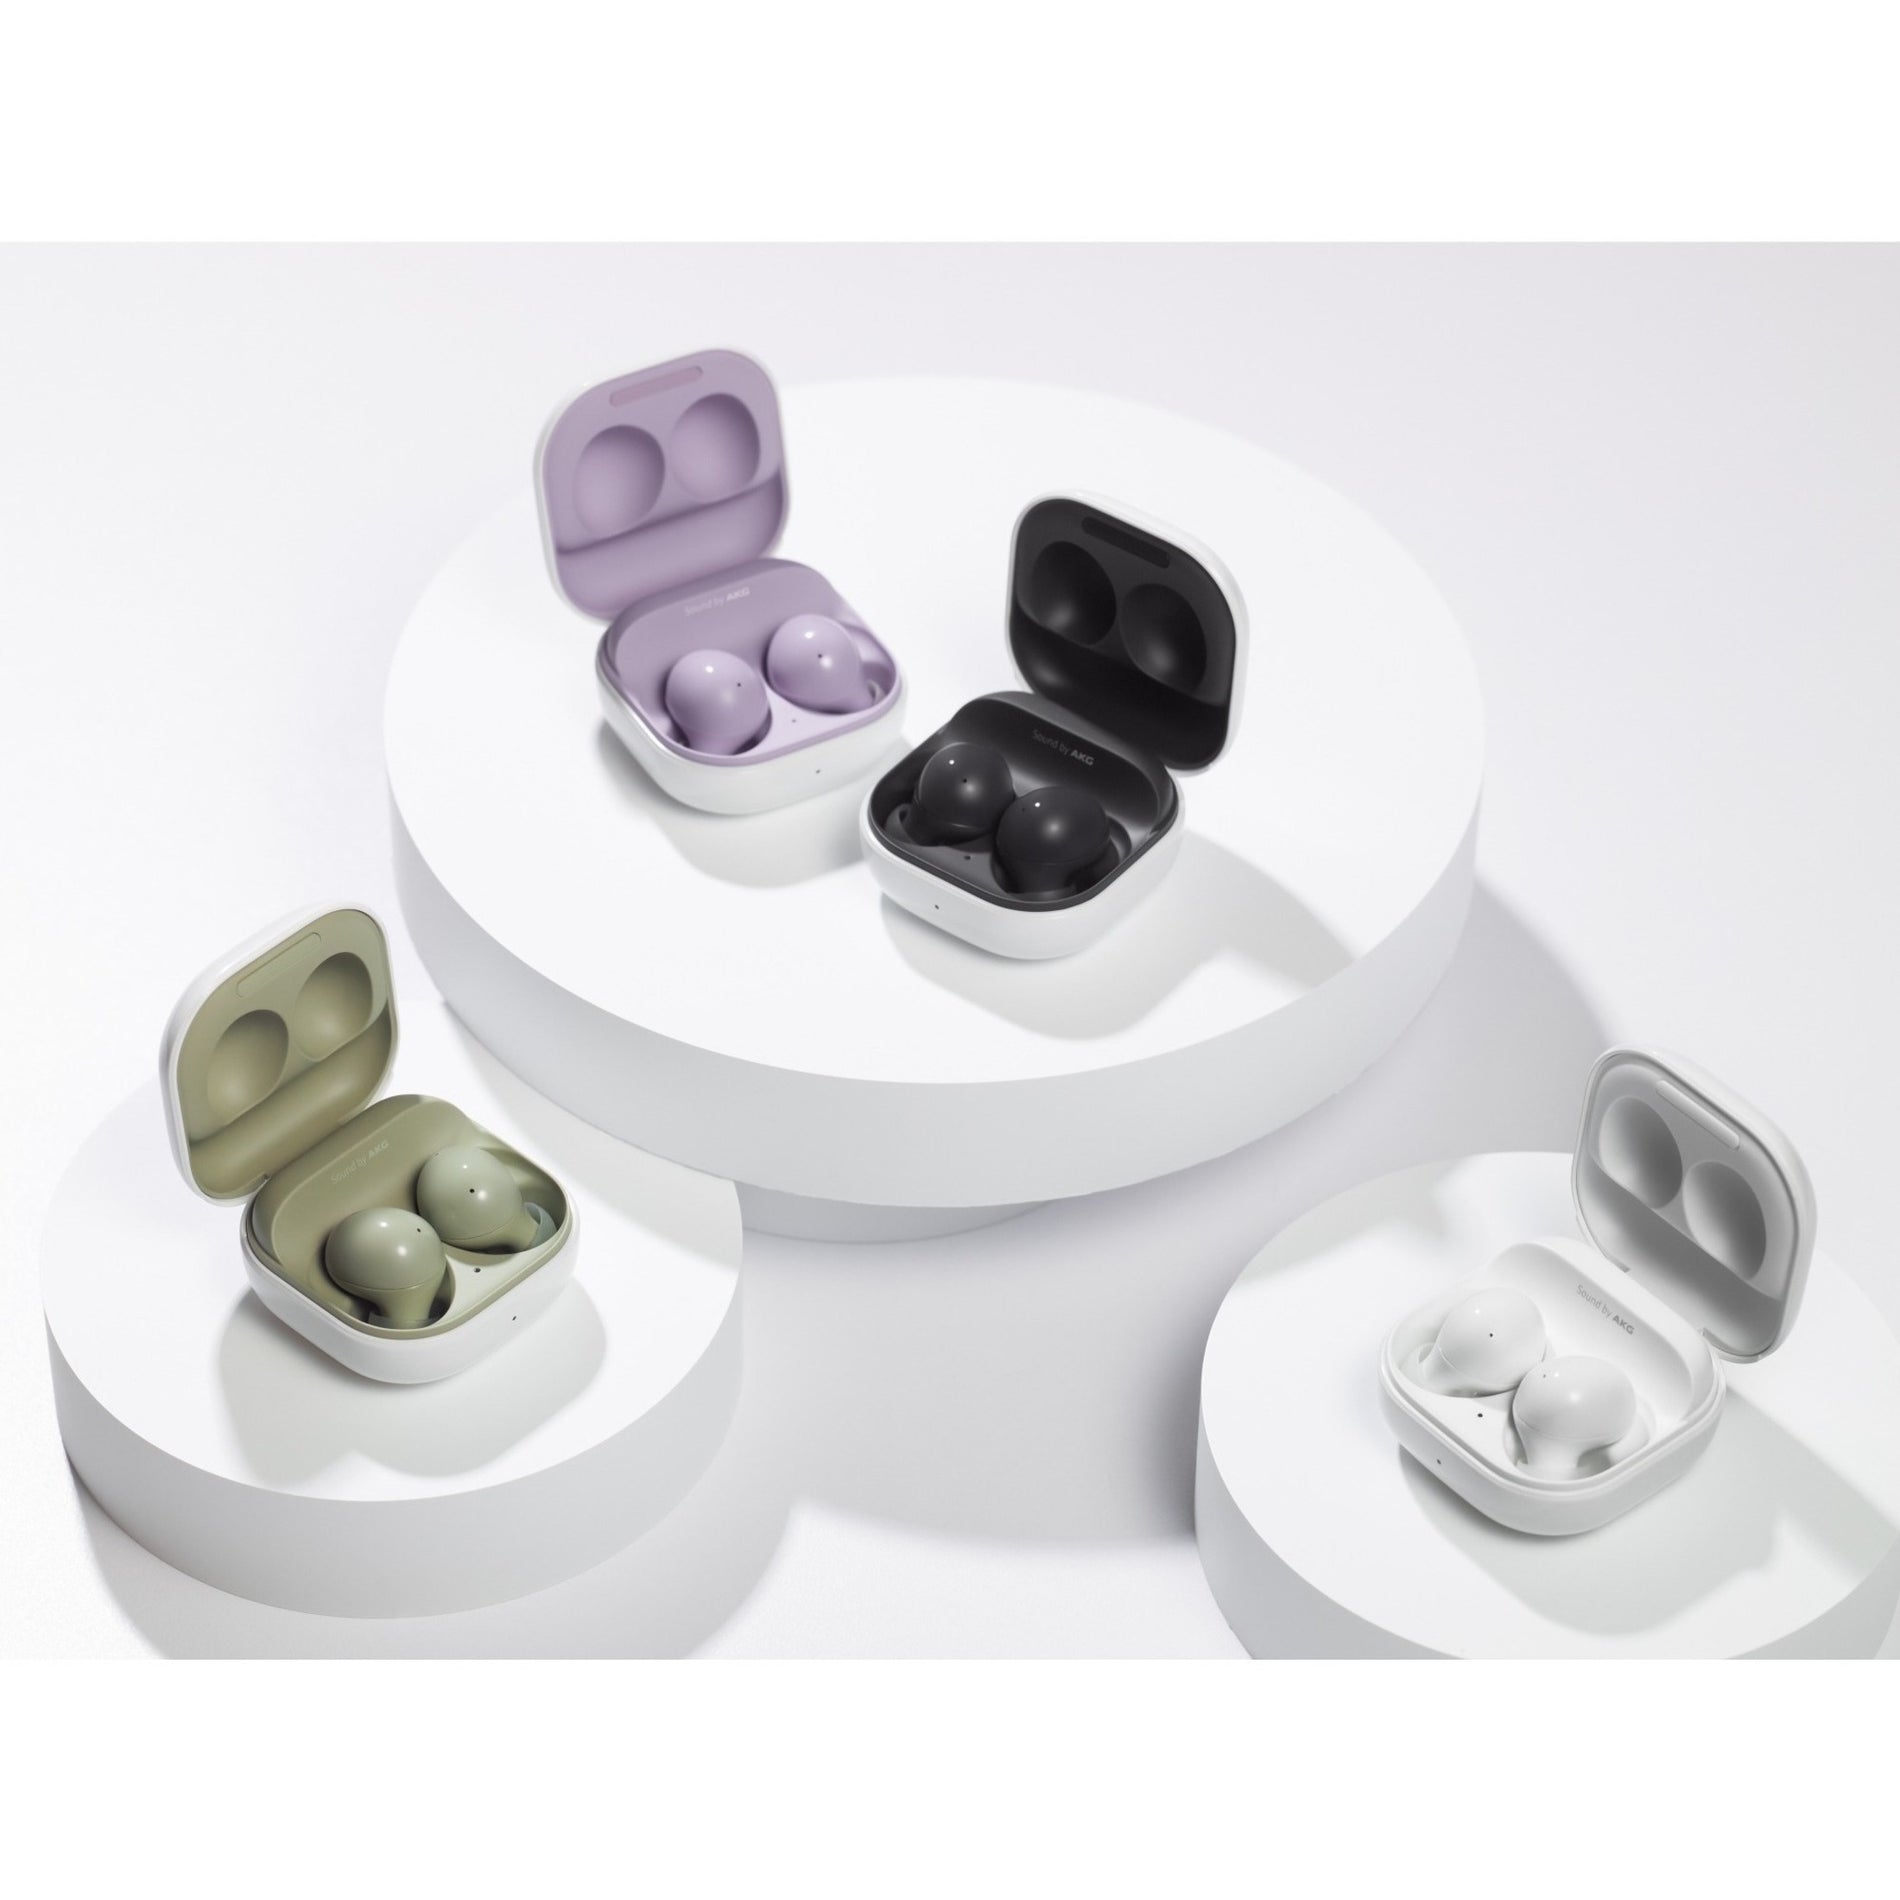 Samsung SM-R177NZKAXAR Galaxy Buds2 Graphite, True Wireless Earbuds with Active Noise Canceling